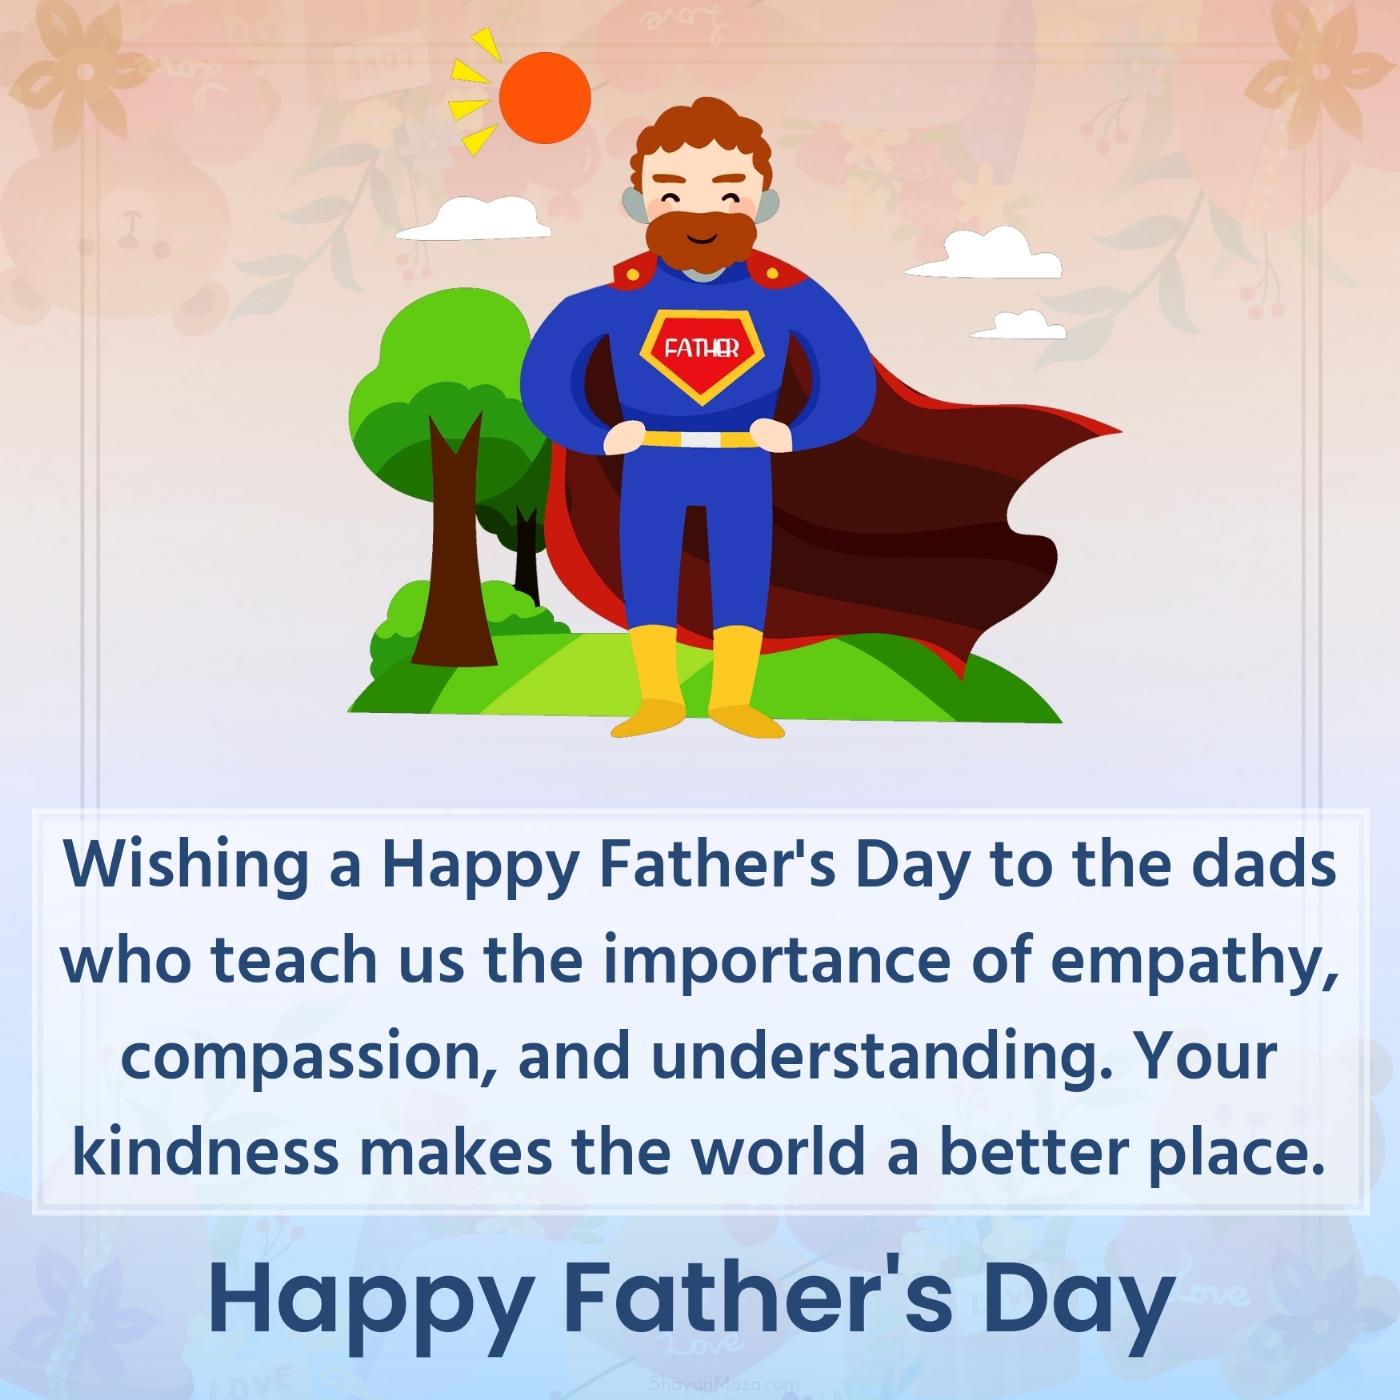 Wishing a Happy Father's Day to the dads who teach us